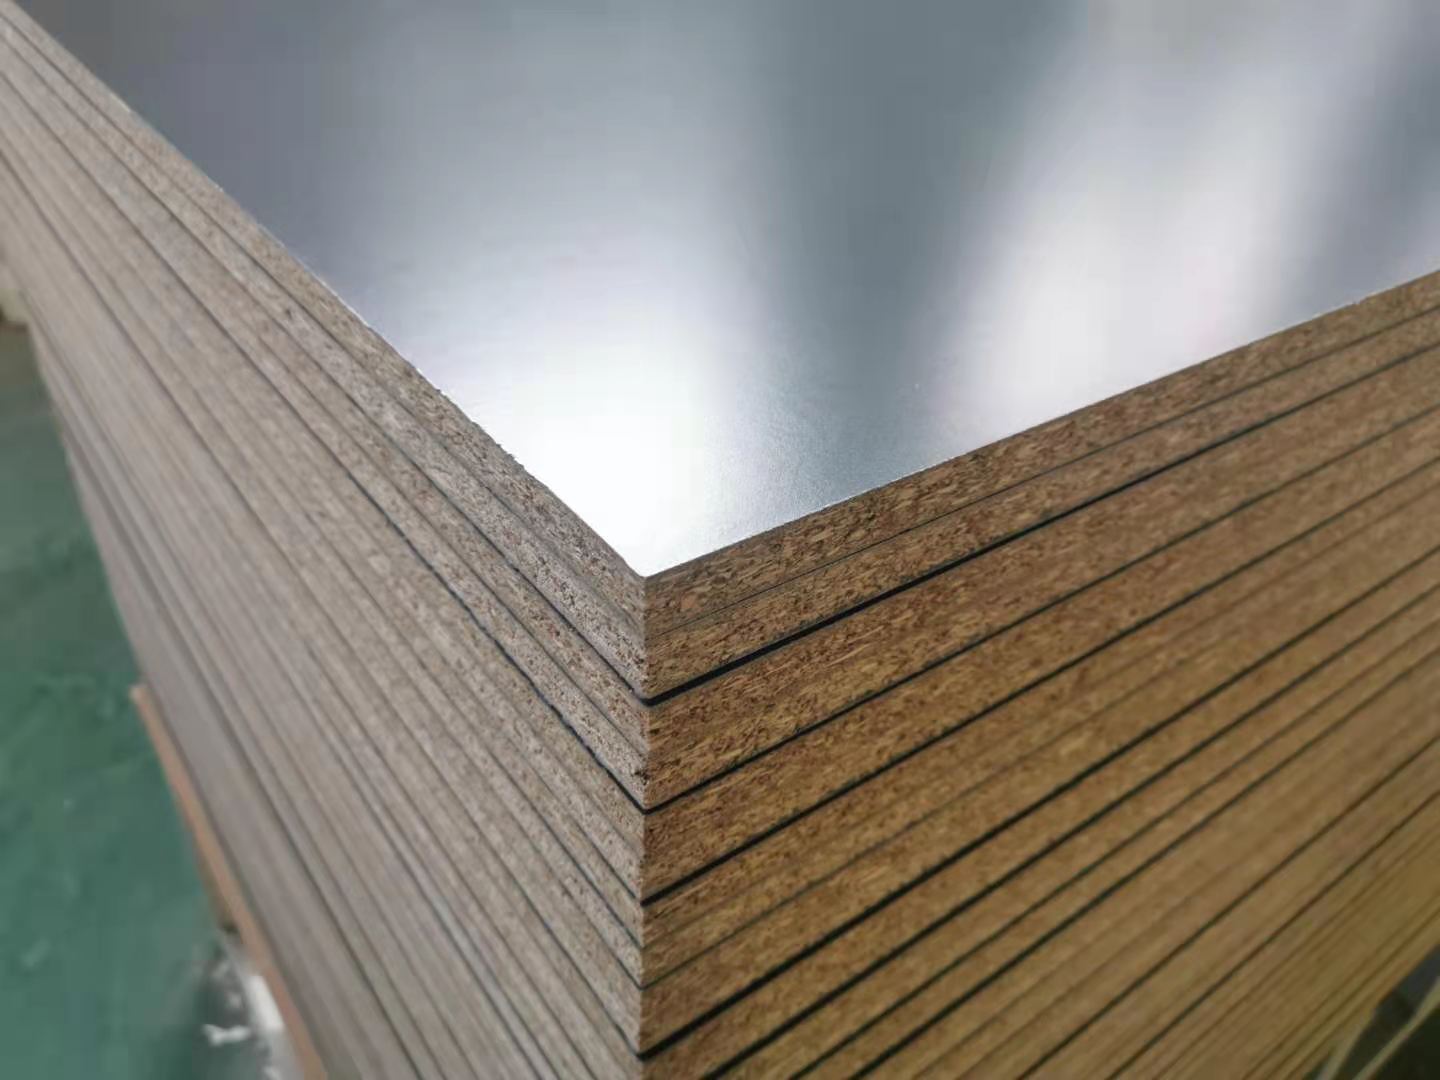 Melamine Particle Board for Furniture